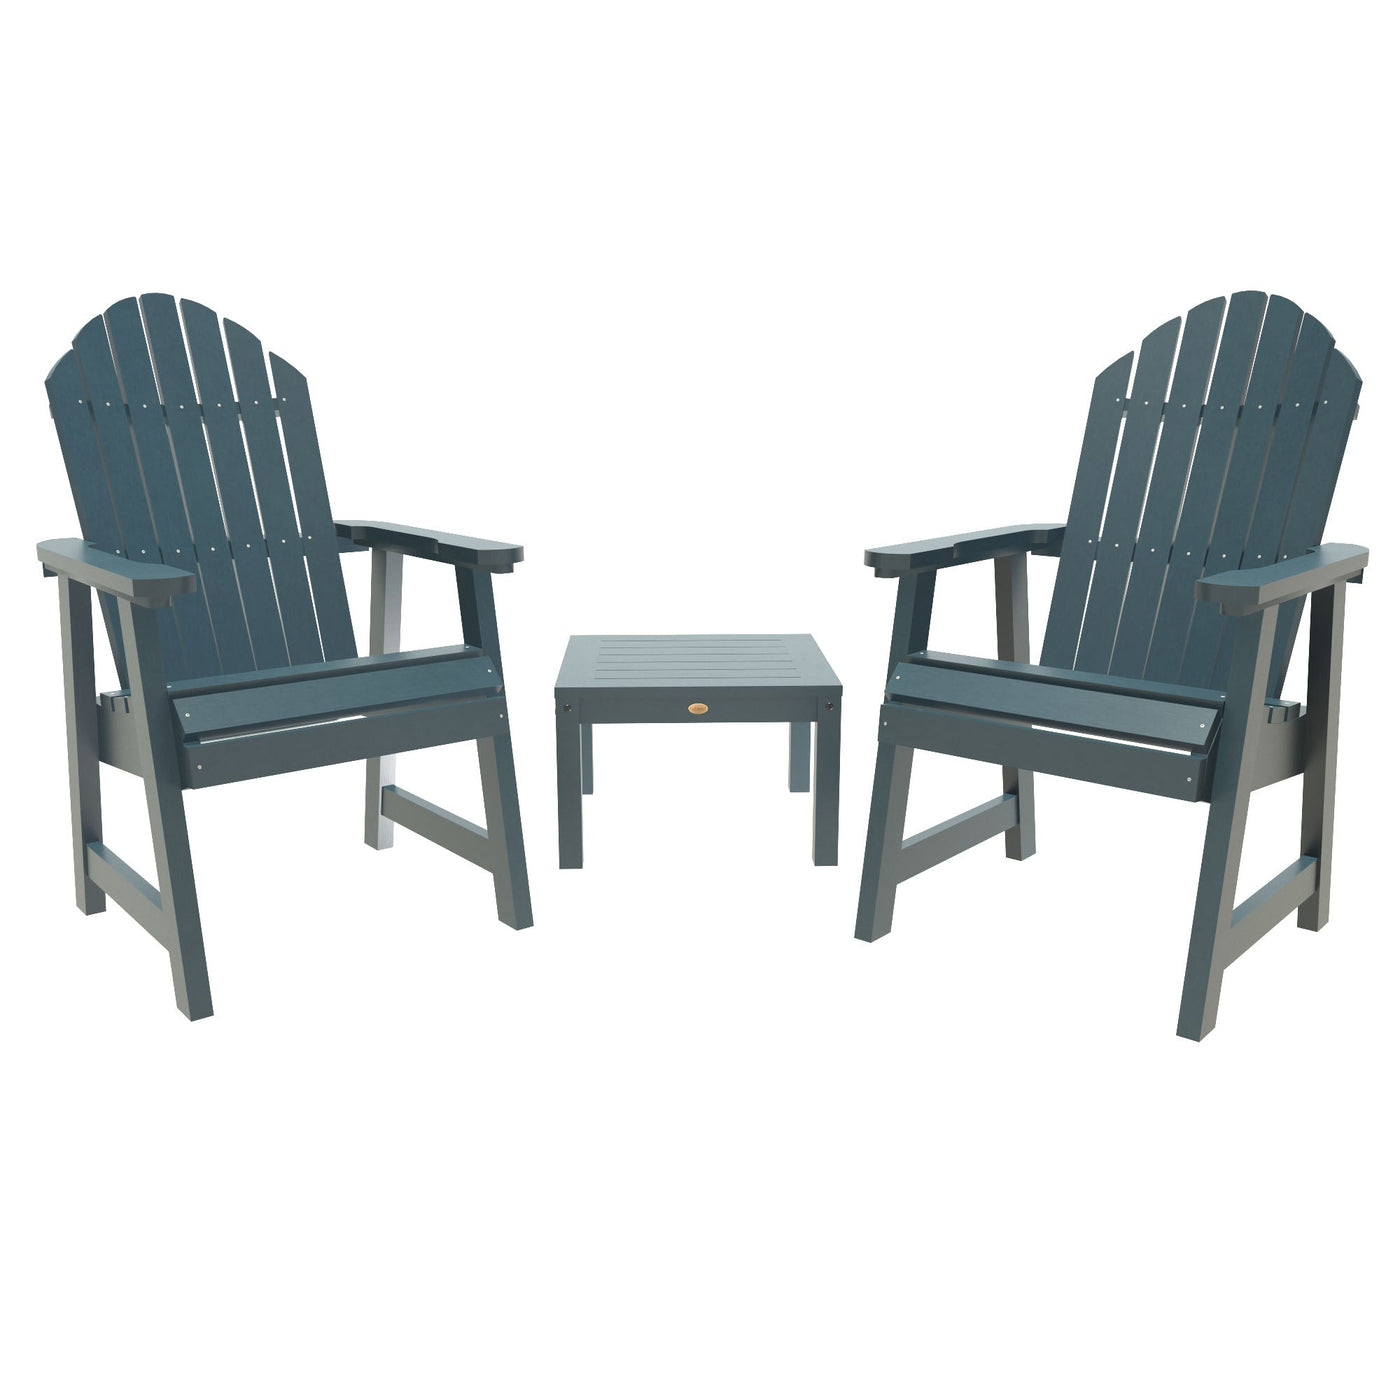 2 Hamilton Deck Chairs with Adirondack Side Table Highwood USA Nantucket Blue 